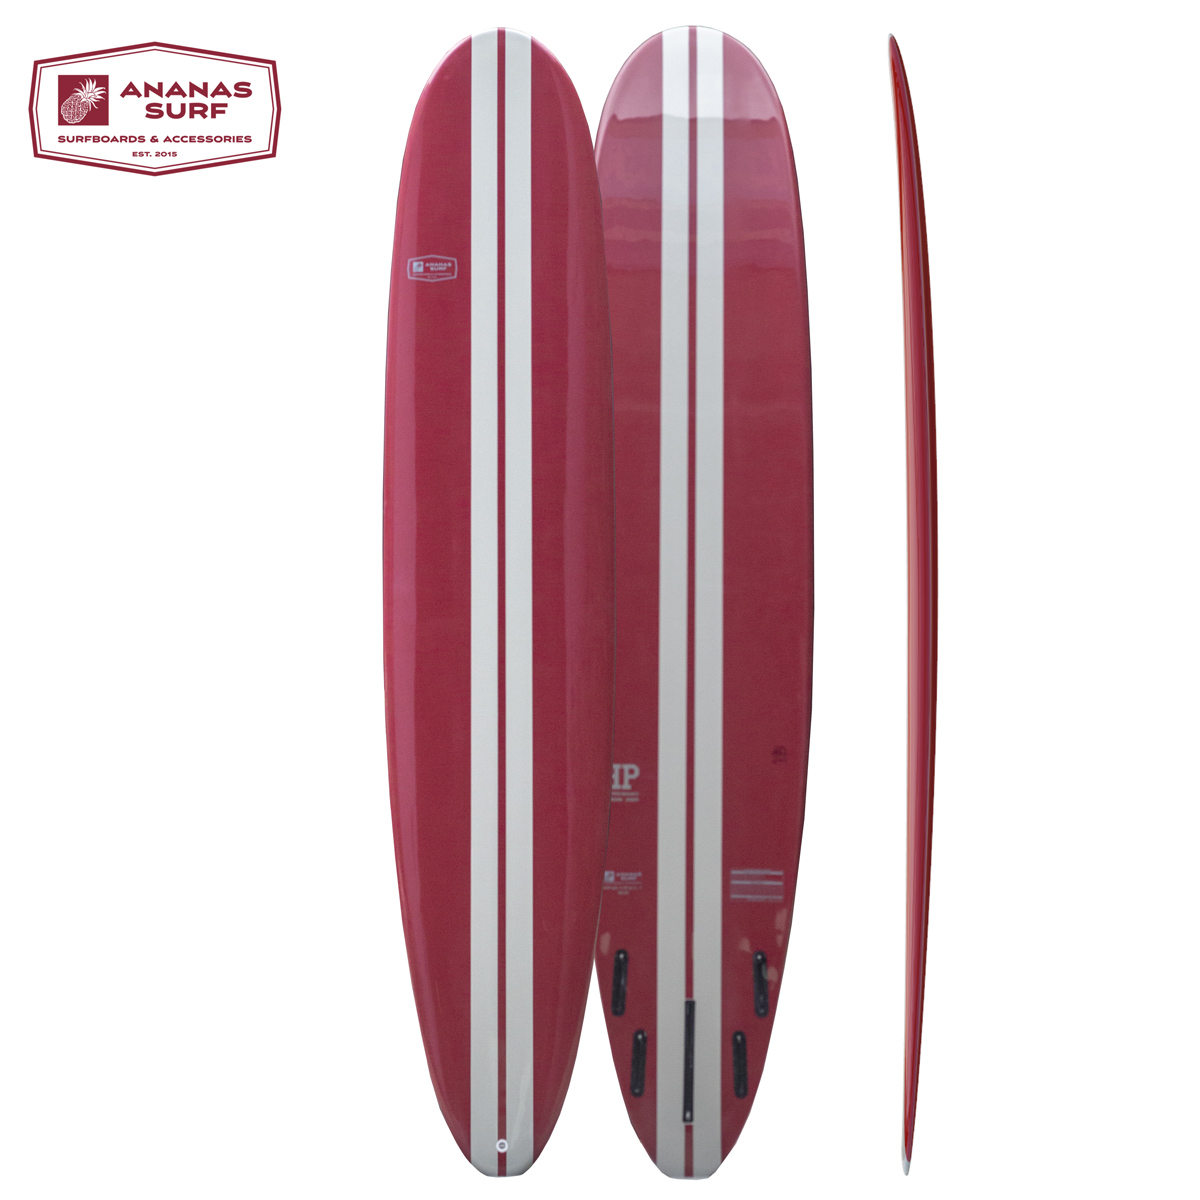 Ananas Surf High Perfomance longboard surfboard 2019 red